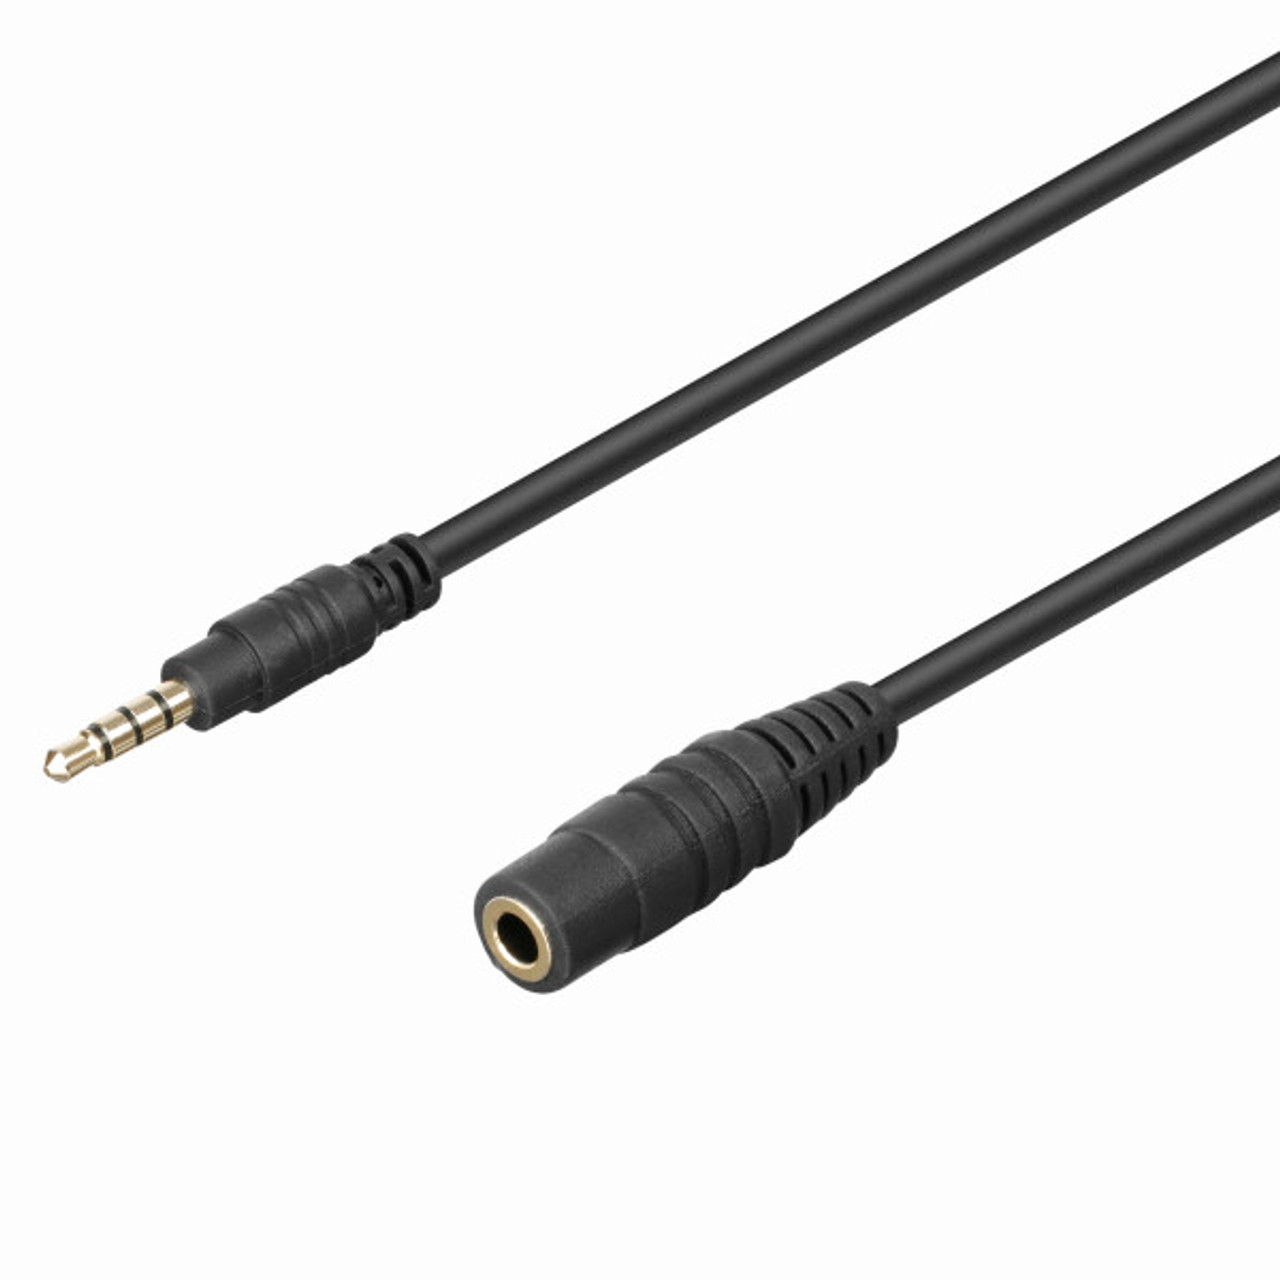 SARAMONIC SR-SC5000 3.5MM TRRS EXTENSION CABLE (16.4 FT)